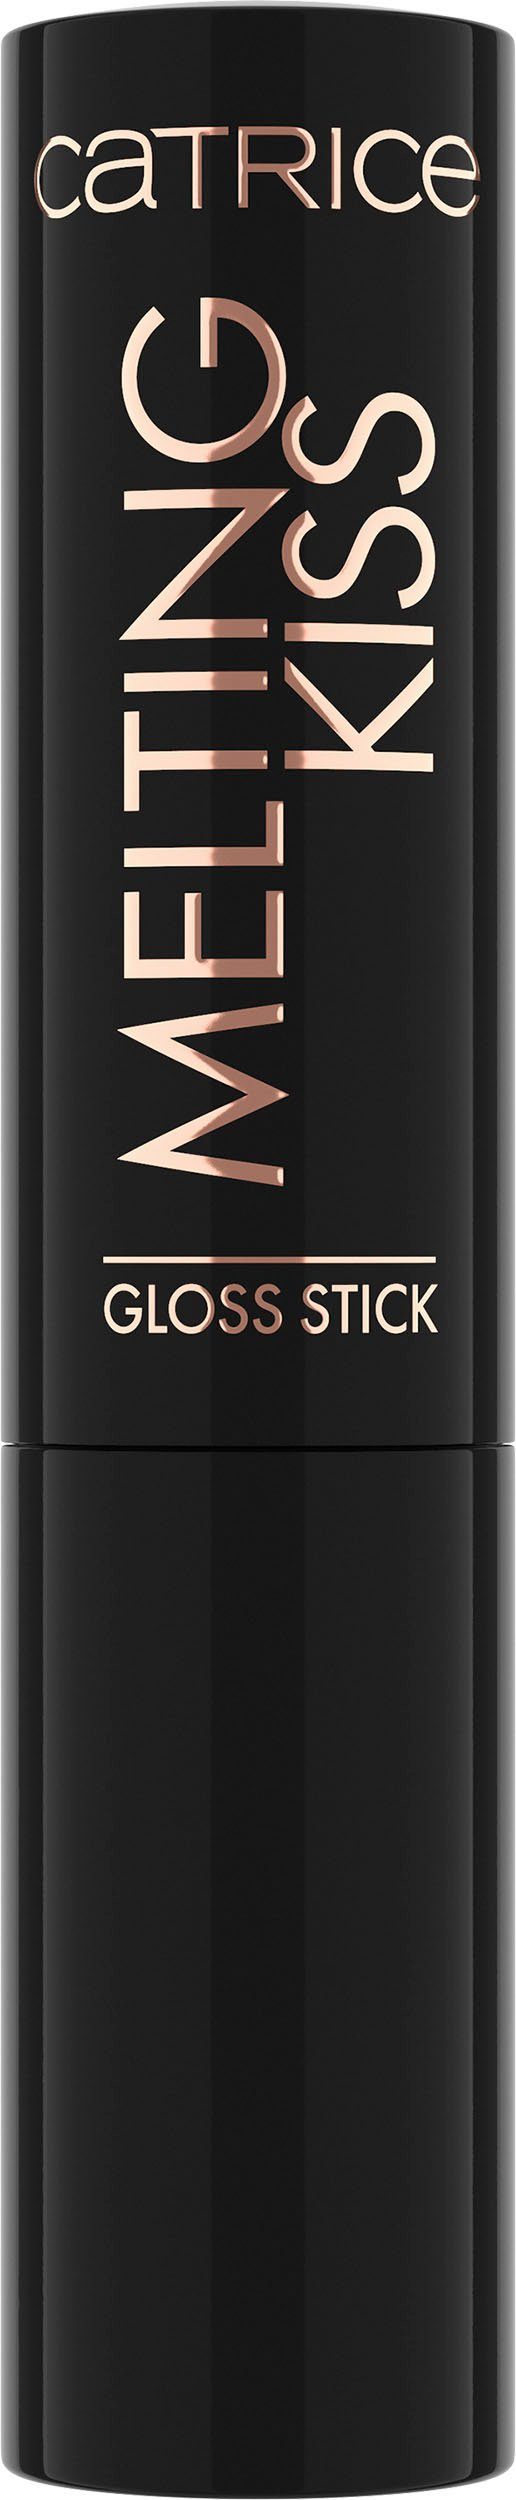 Gloss 3-tlg. strong Lippenstift Catrice Kiss Melting Stick, Catrice connection